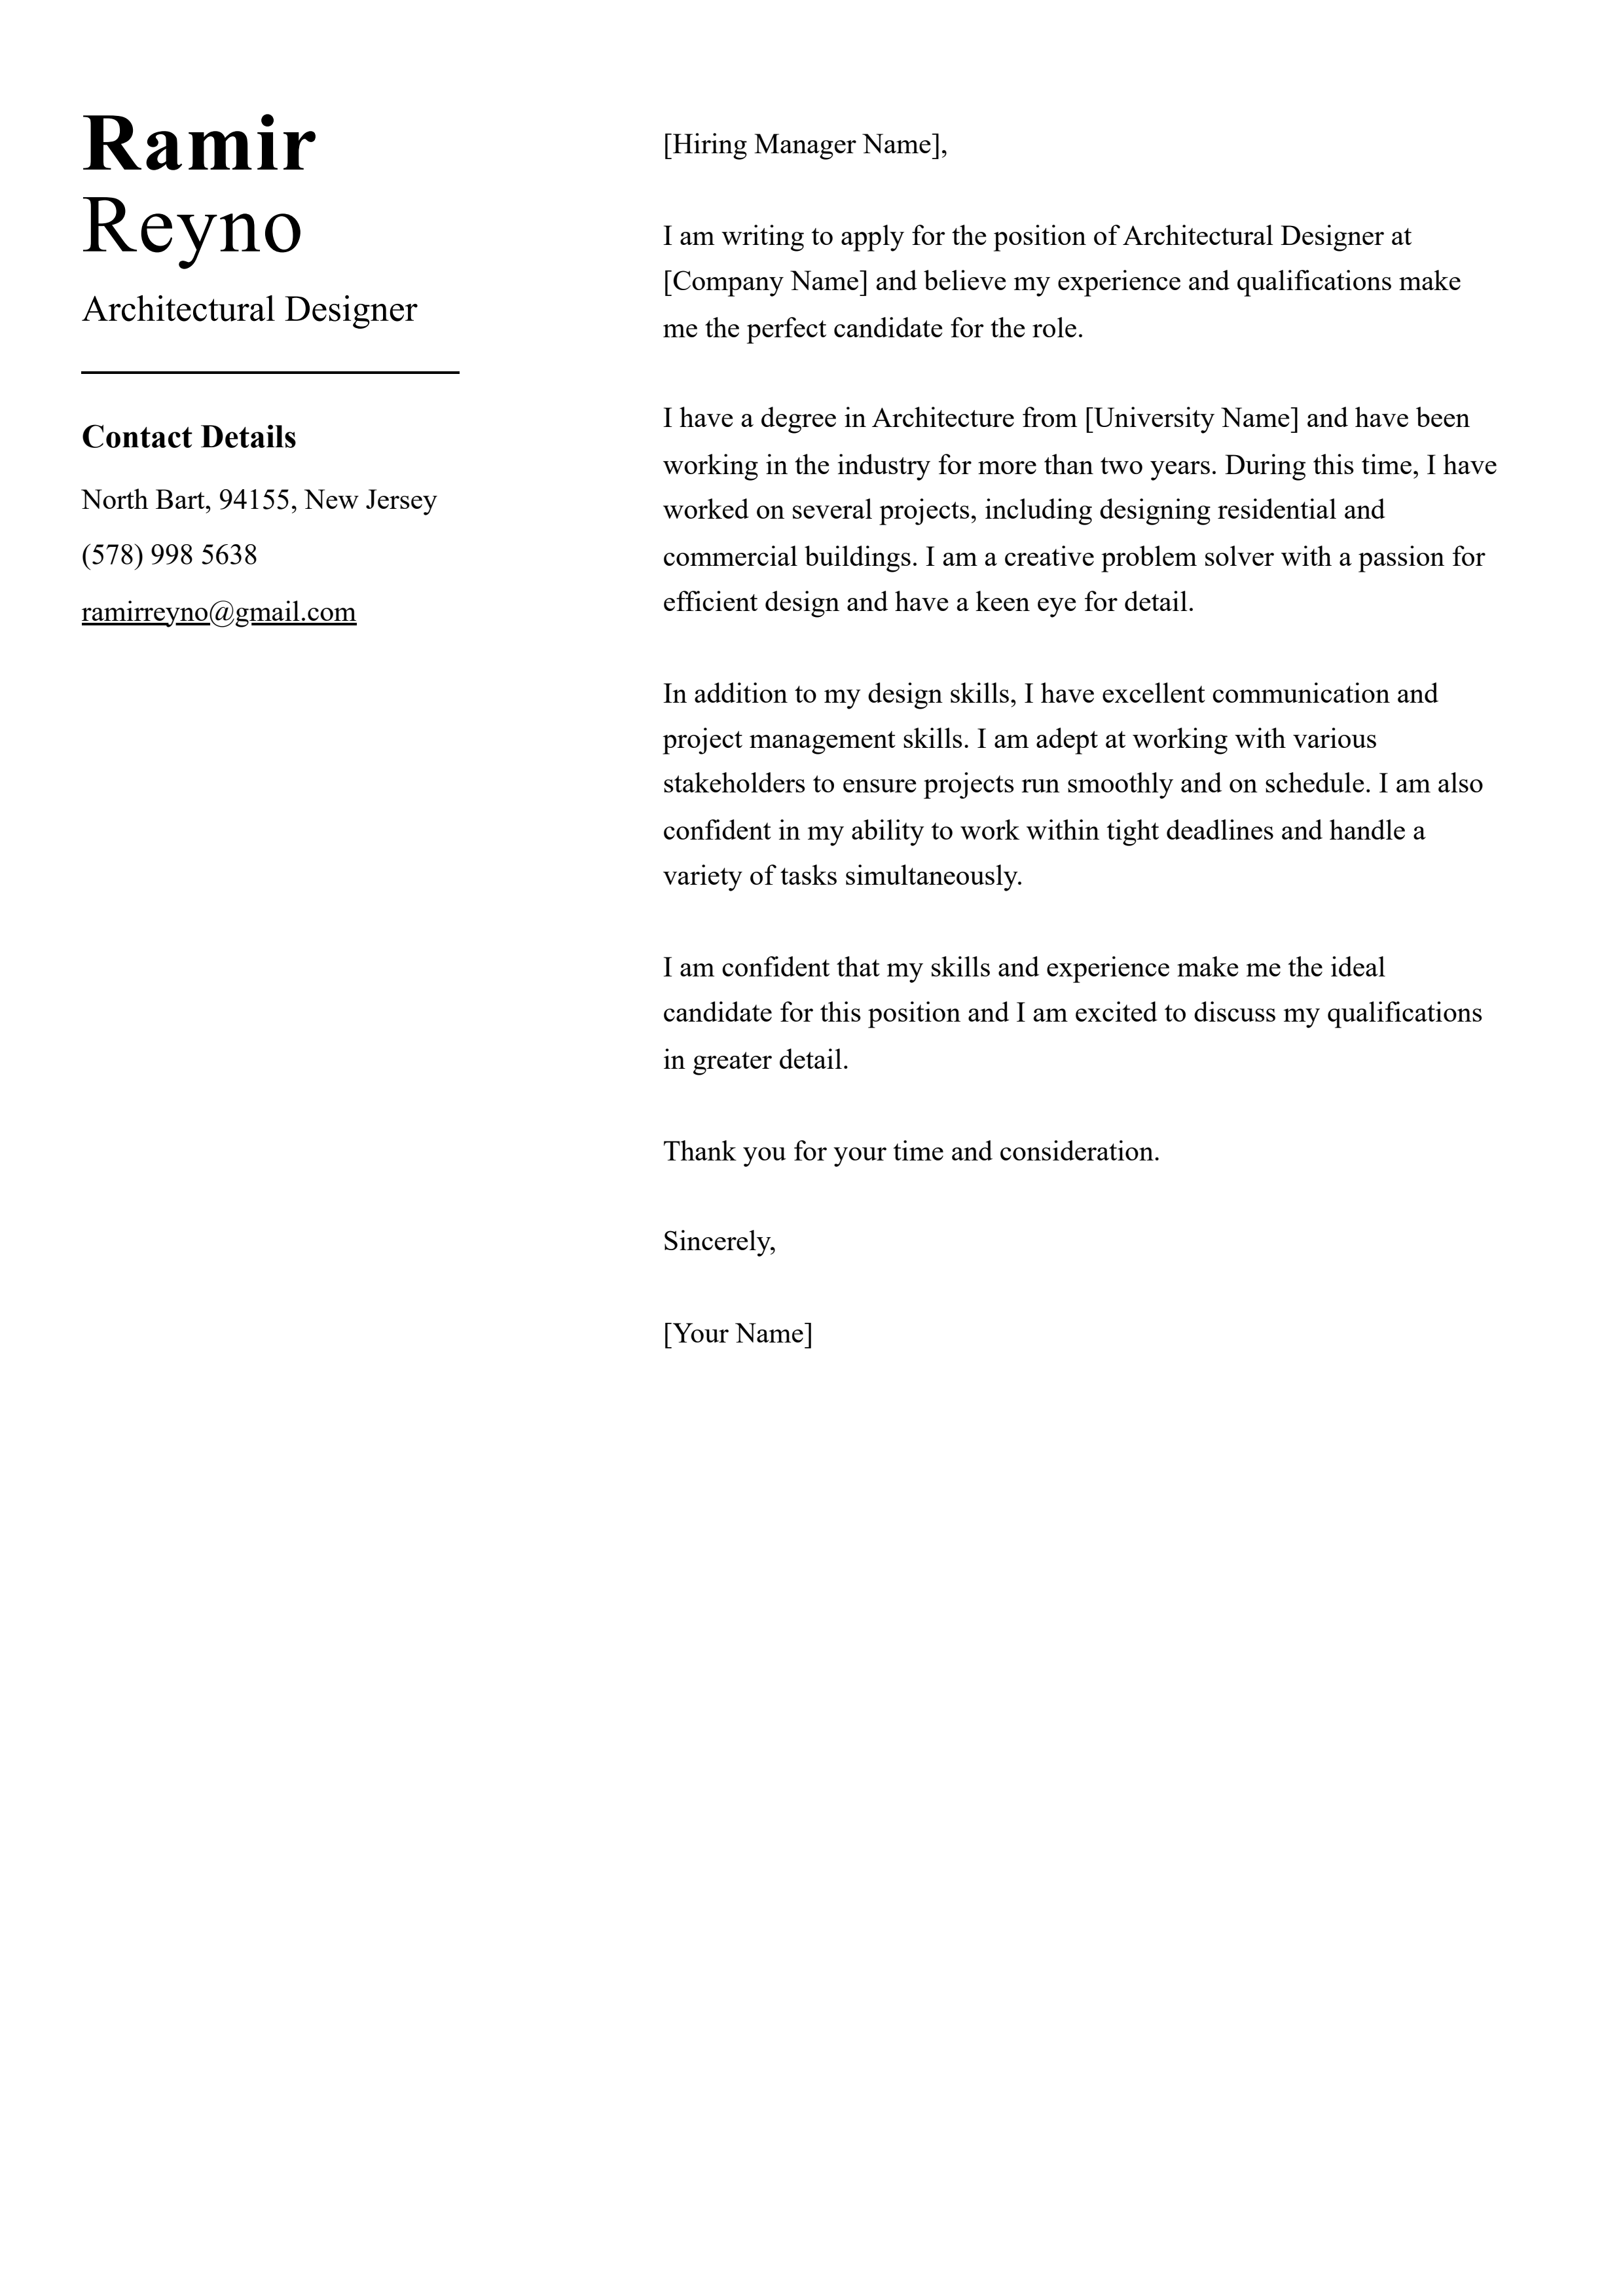 Architectural Designer Cover Letter Example